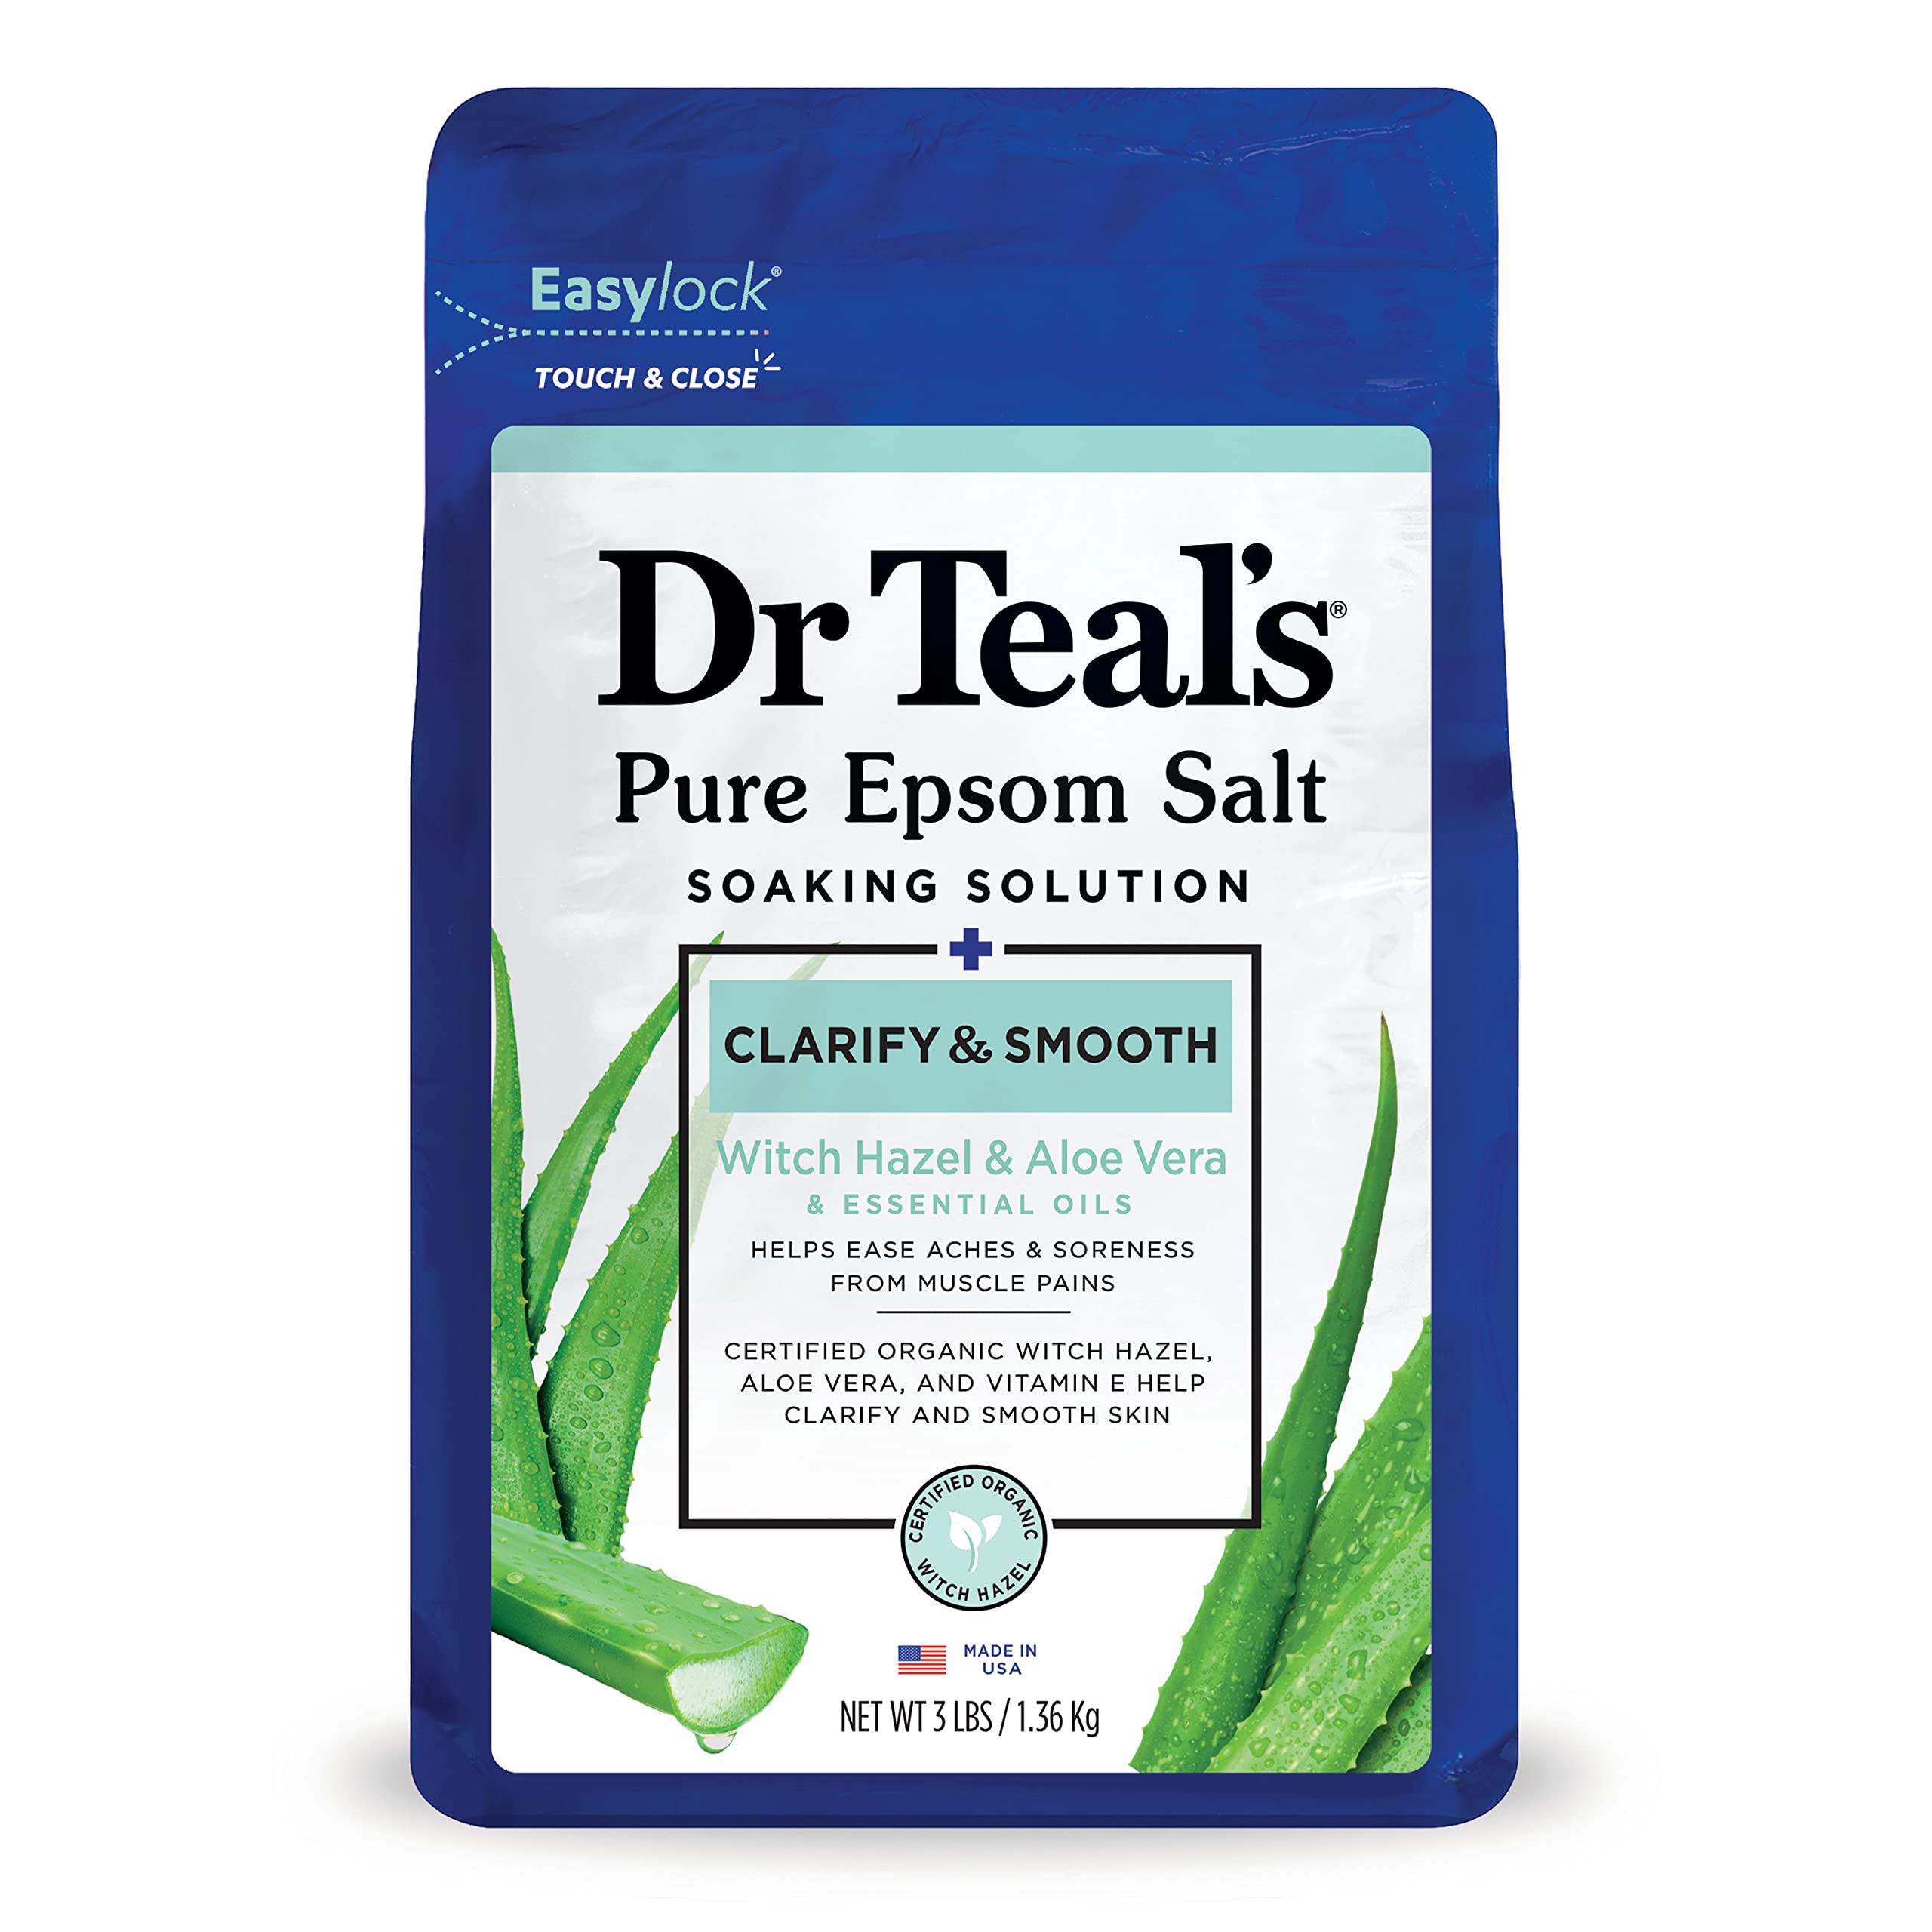 Dr Teal's Pure Epsom Salt, Clarify & Smooth with Witch Hazel & Aloe Vera, 3lbs (Packaging May Vary)